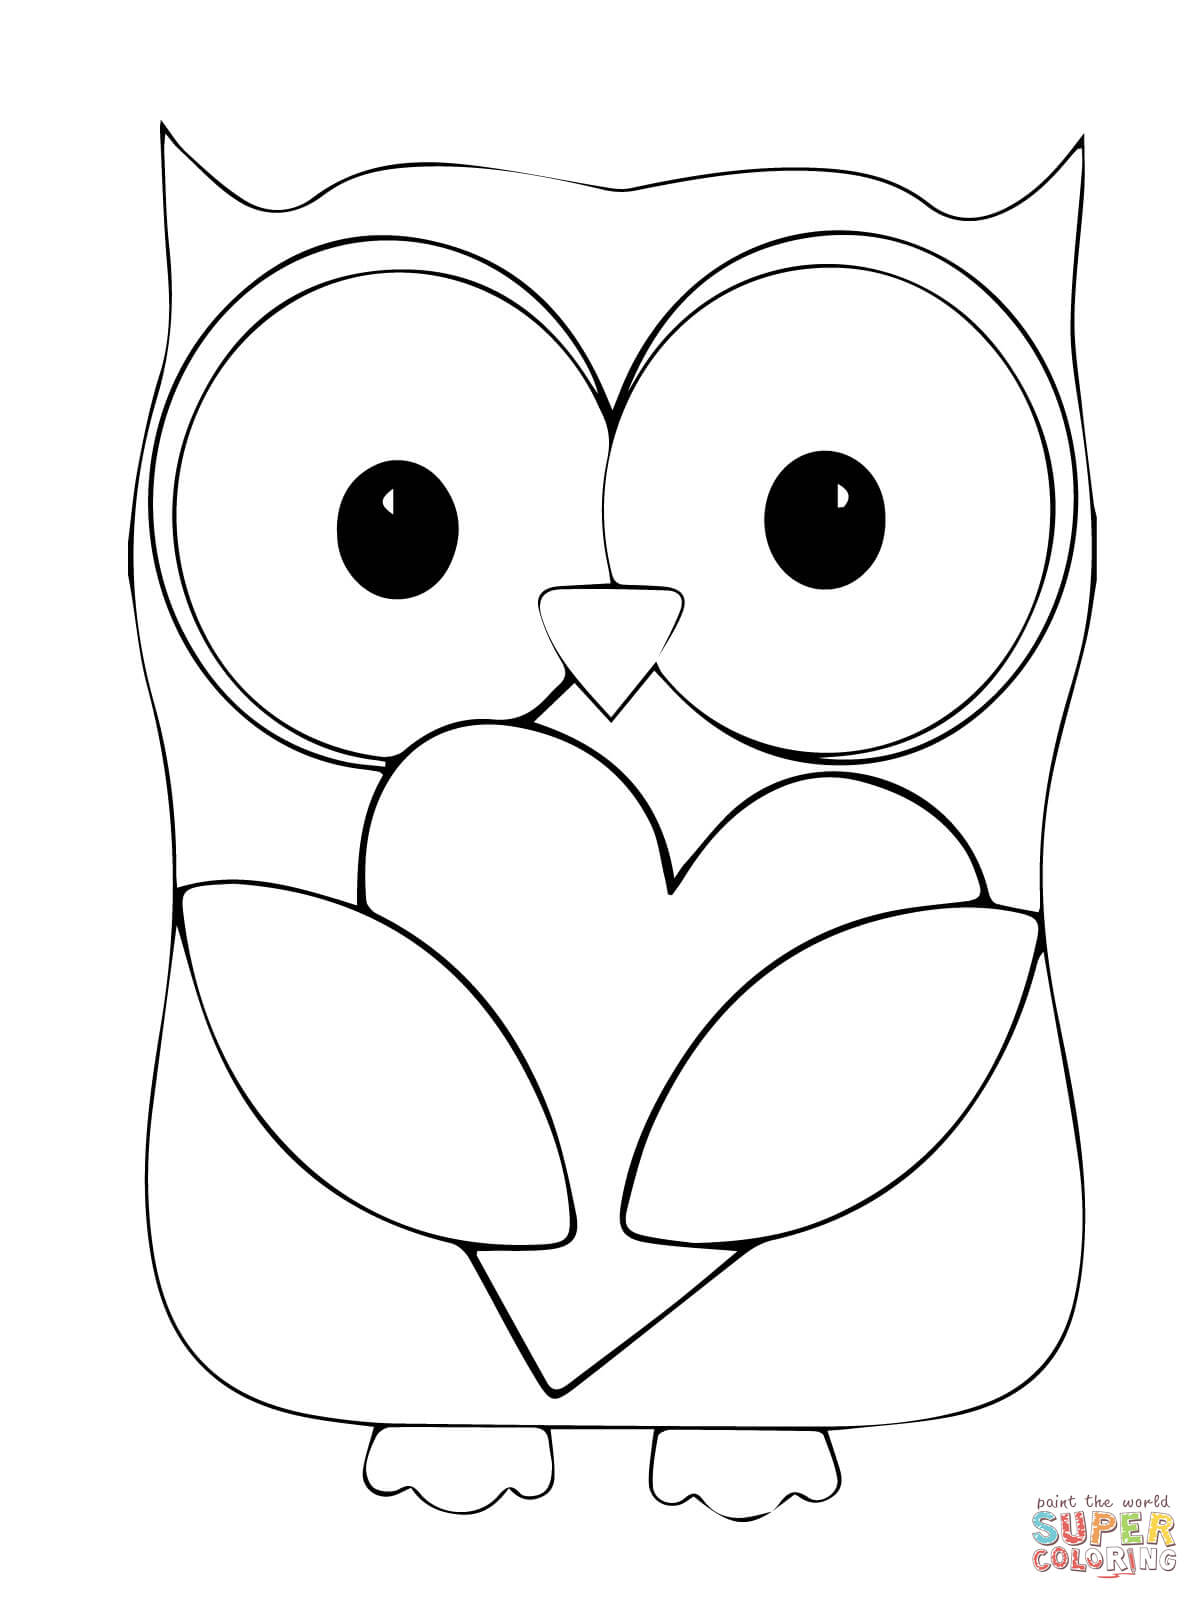 Valentine Day Owl Hugging a Heart coloring page | Free Printable ...